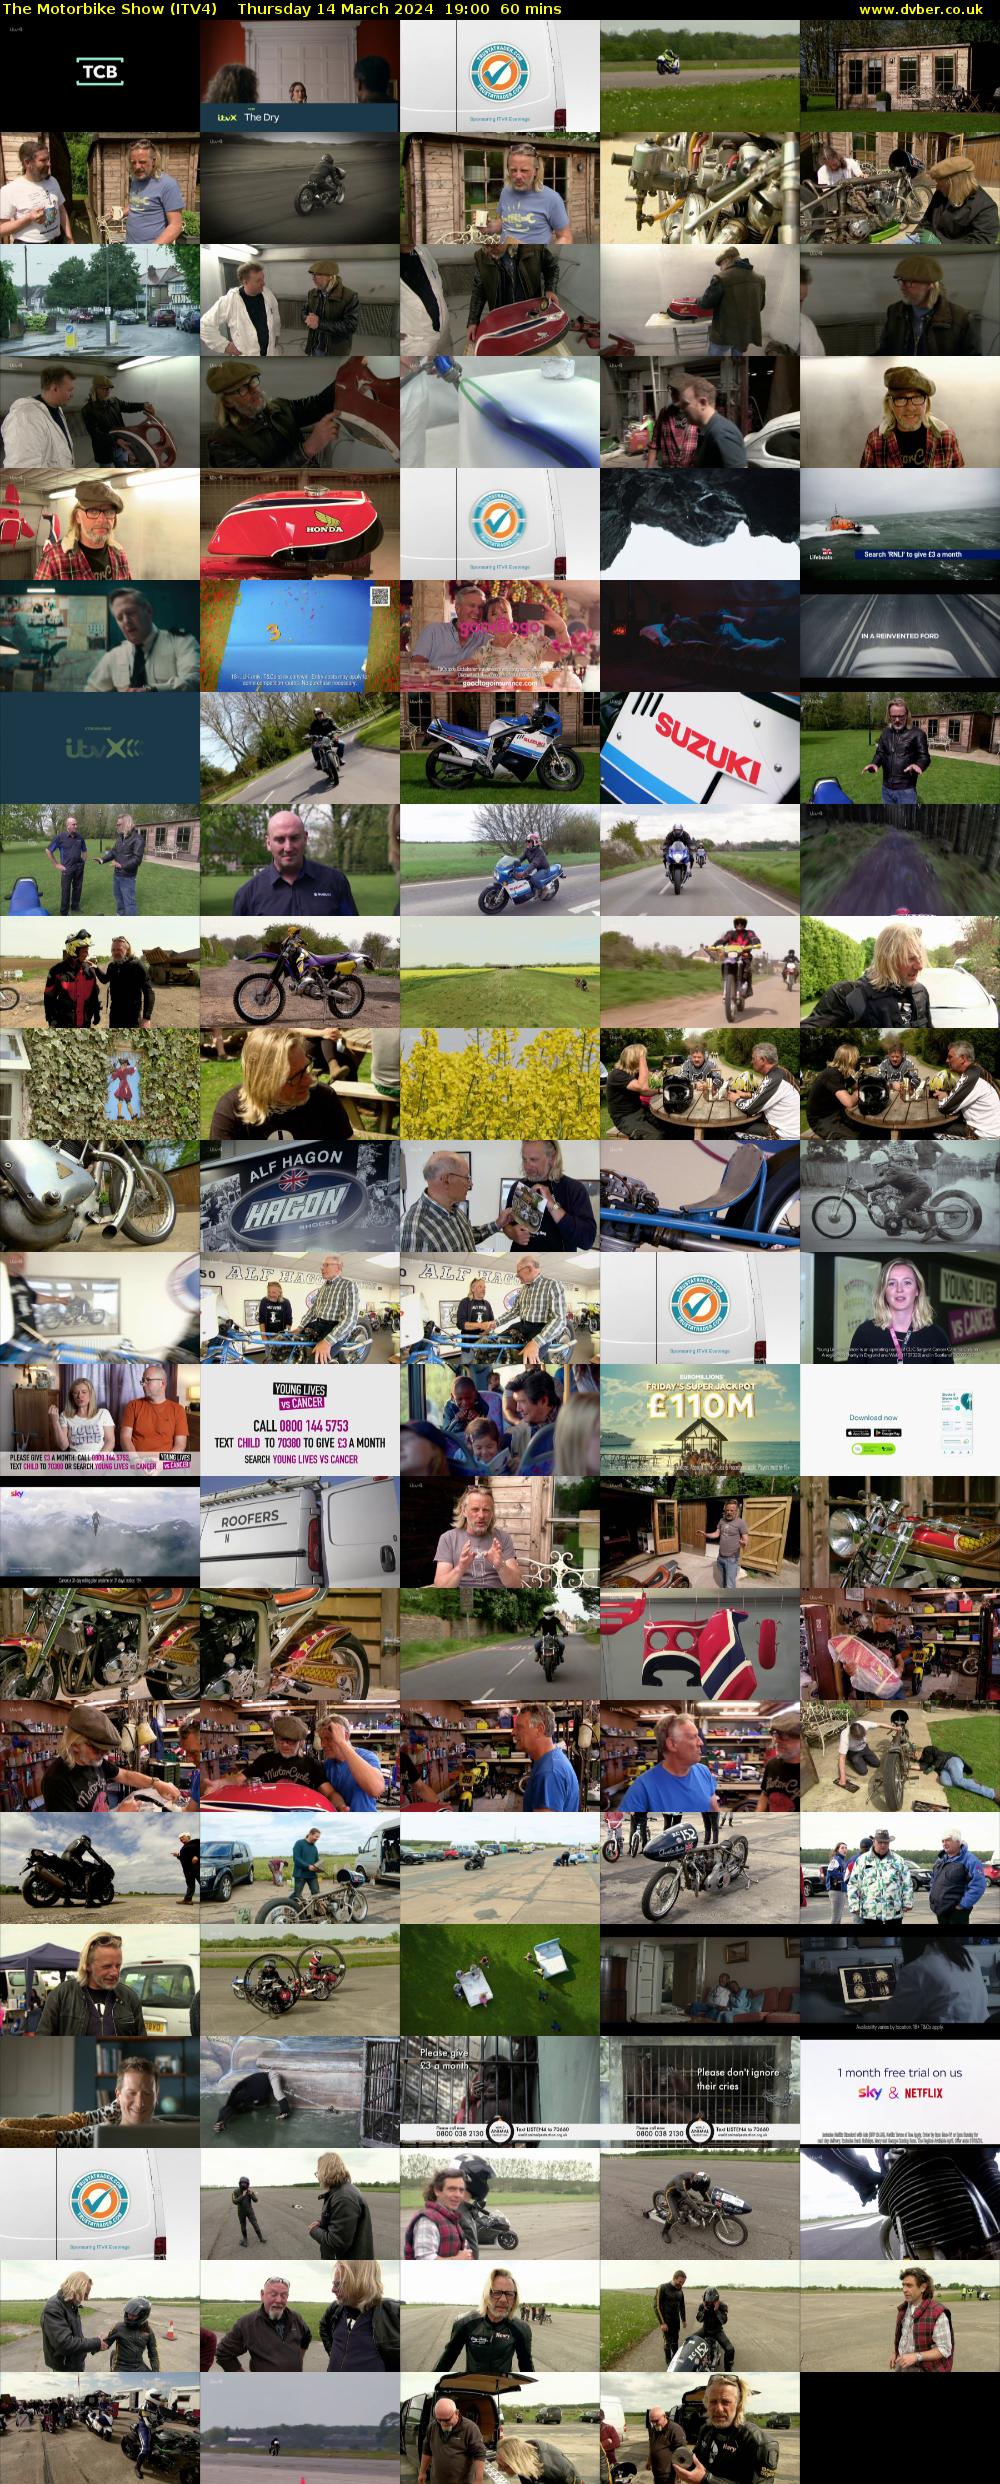 The Motorbike Show (ITV4) Thursday 14 March 2024 19:00 - 20:00